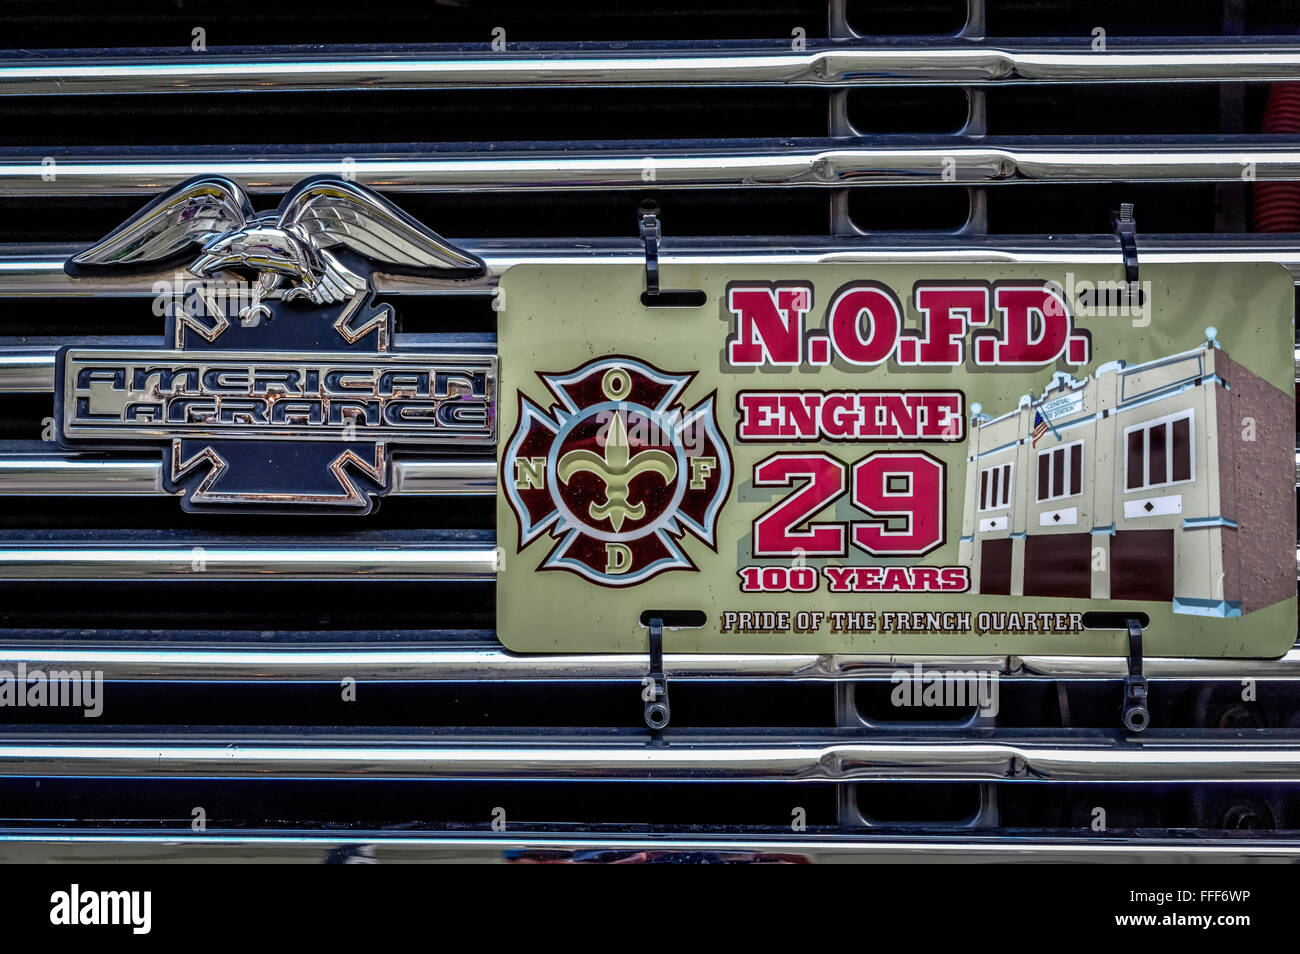 NOFD Engine 29 located in the French Quarter Central Fire Station New Orleans LA Stock Photo